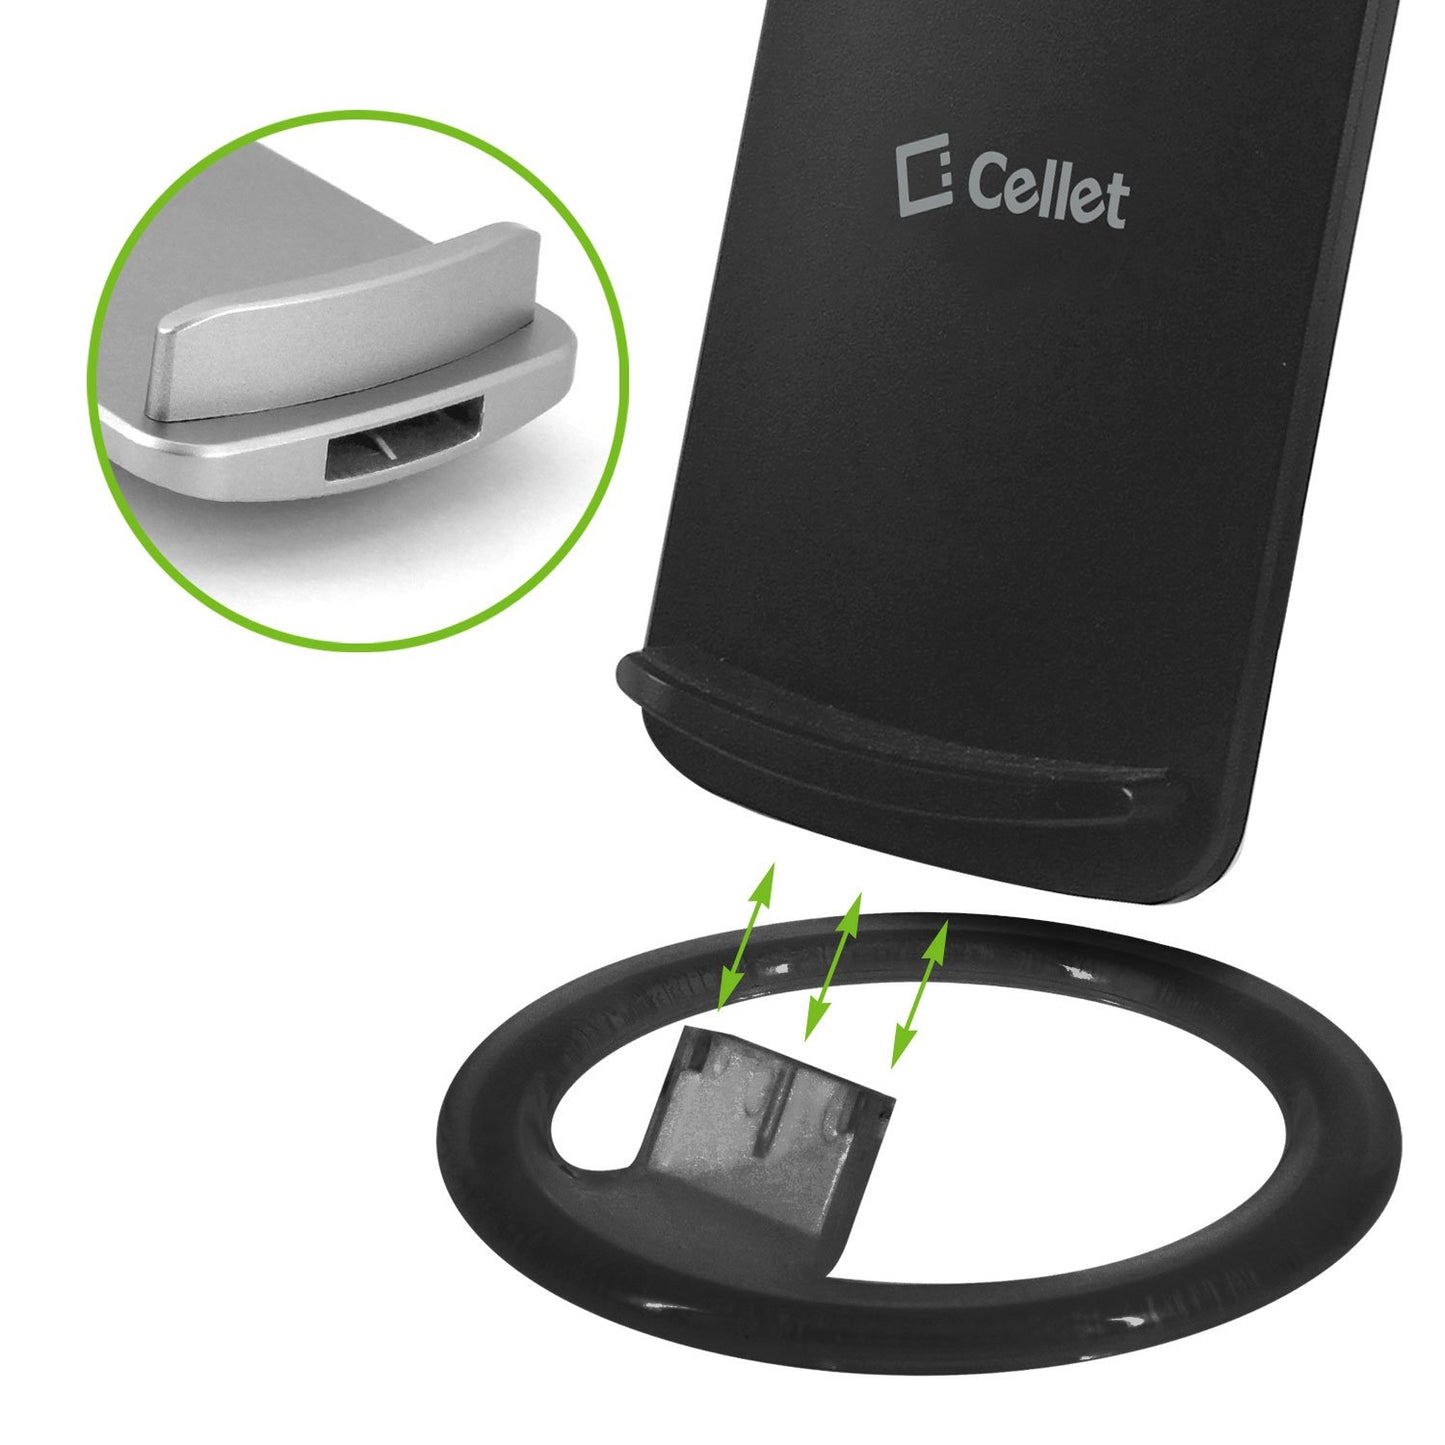 QI300BK - Wireless Charging Pad, Cellet Adjustable Dual Coil Wireless Charging Stand for all Wireless (Qi) Enabled Devices - Black